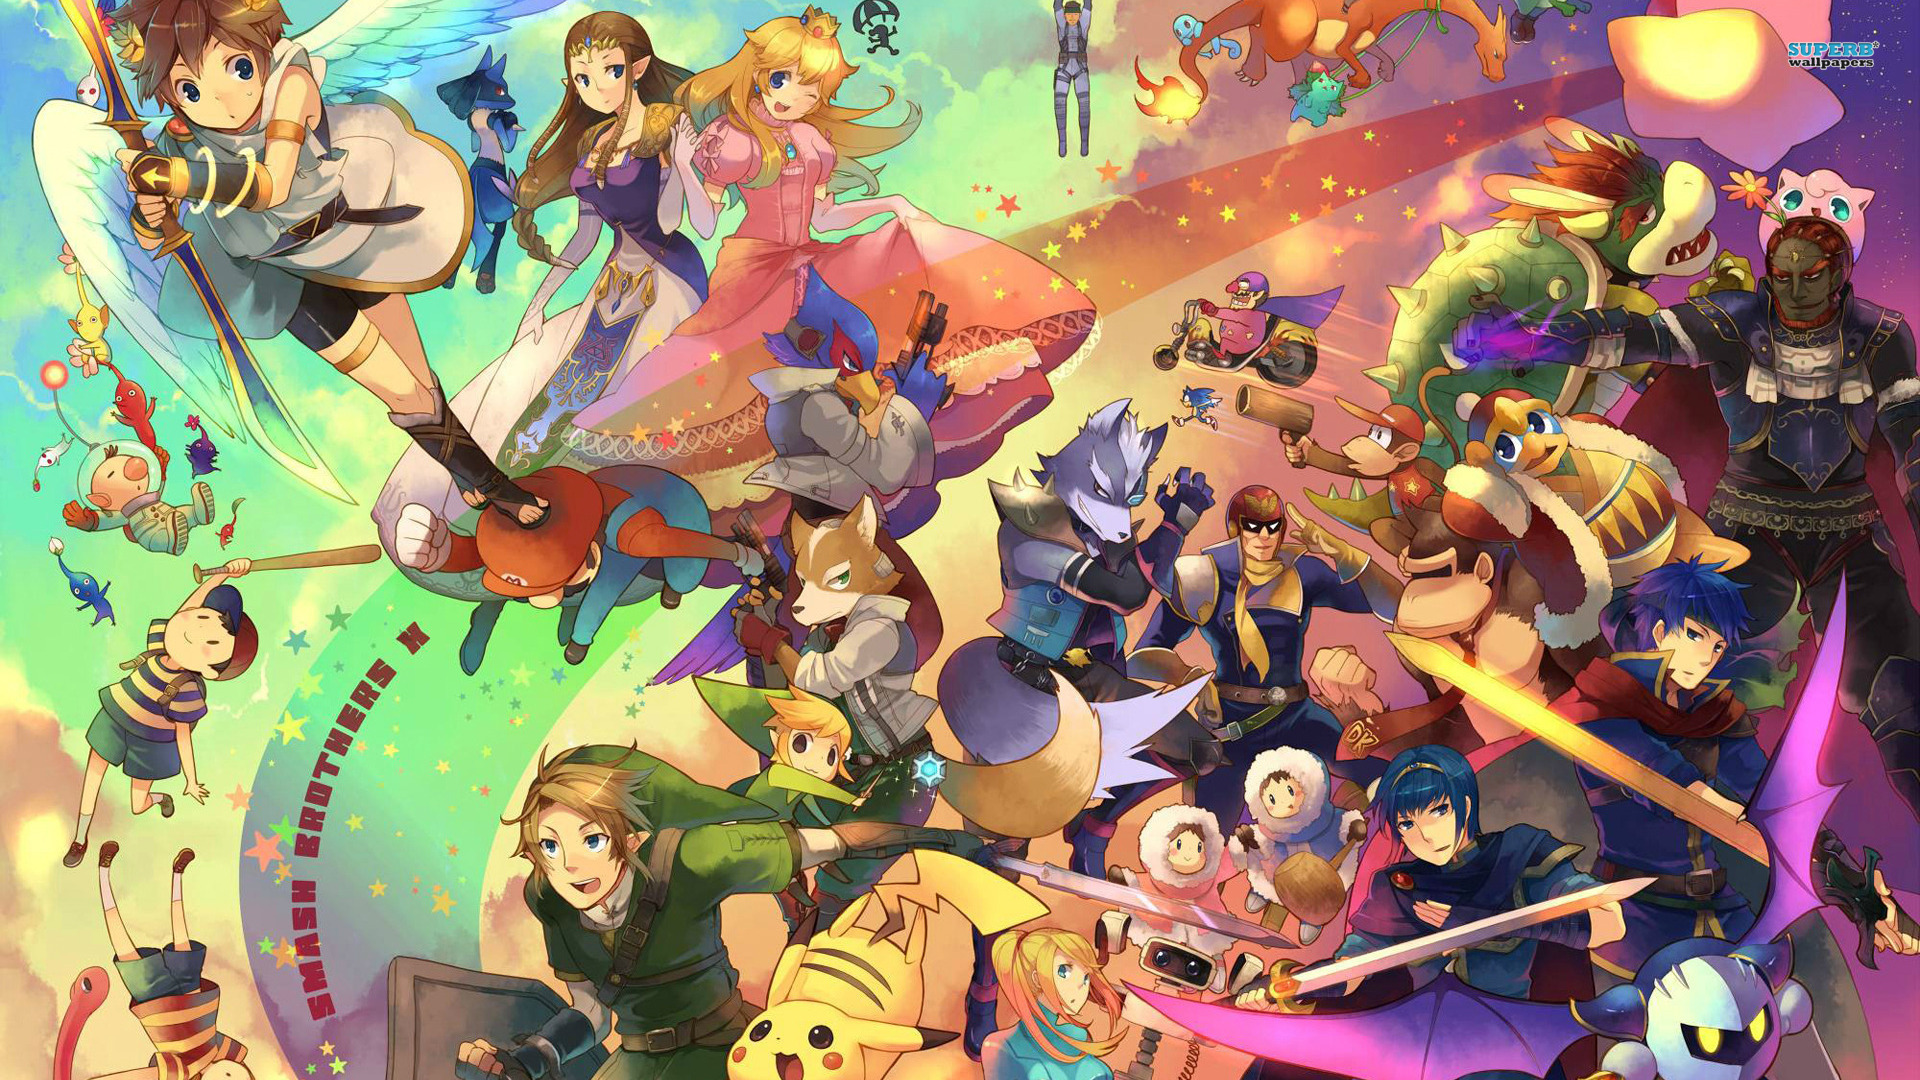 Super Smash Bros. For Nintendo 3ds And Wii U Computer Wallpapers ...